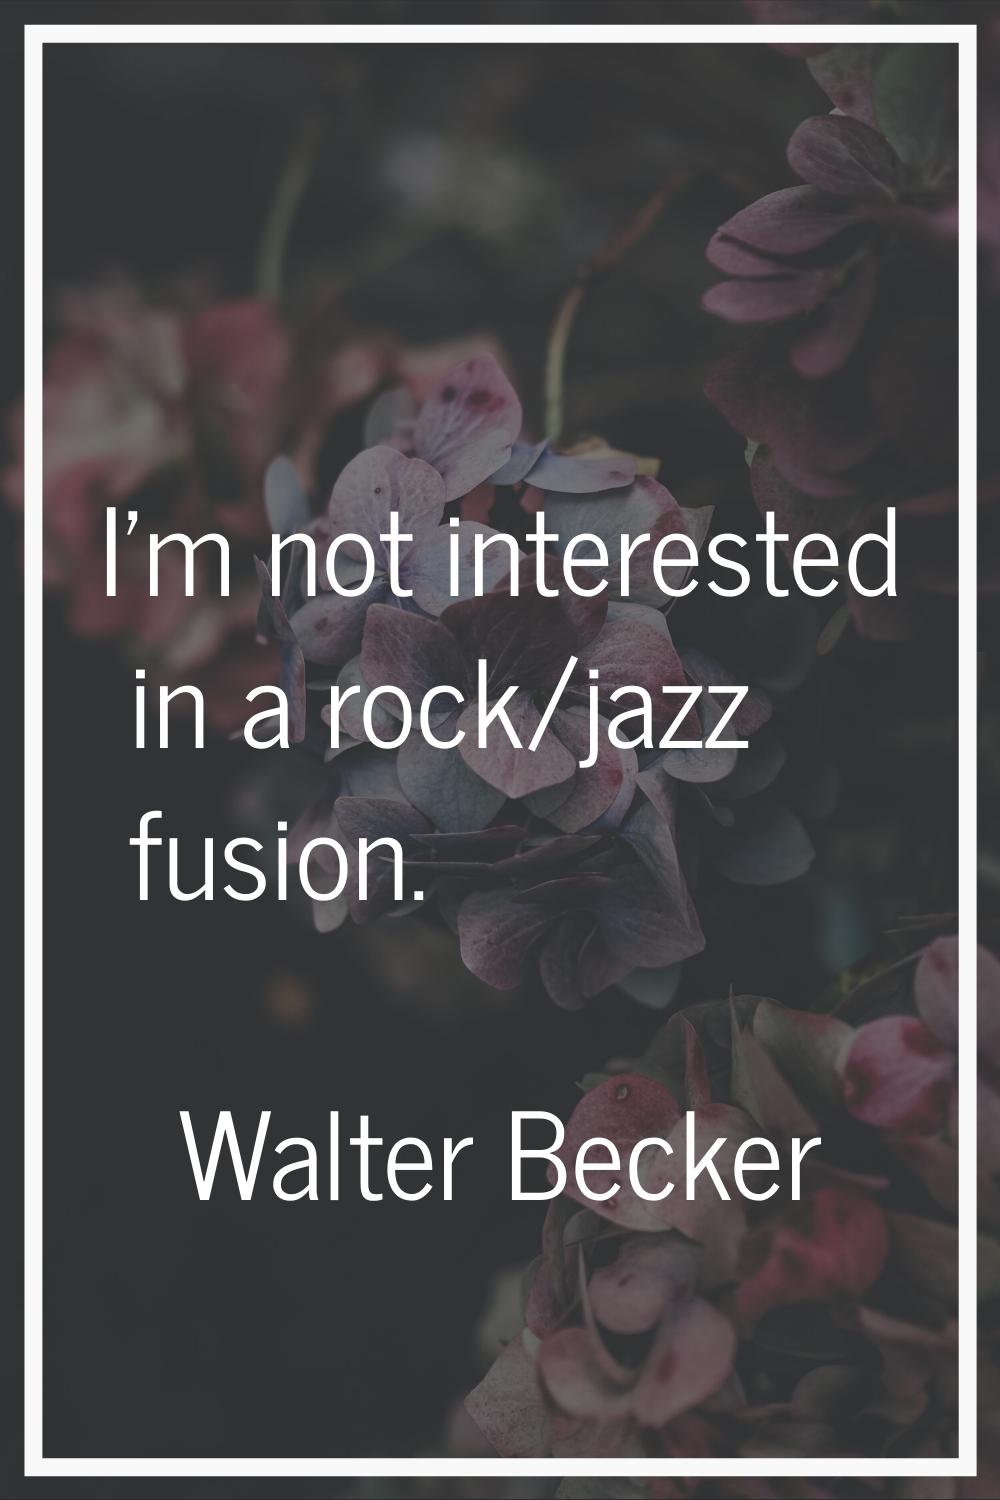 I'm not interested in a rock/jazz fusion.